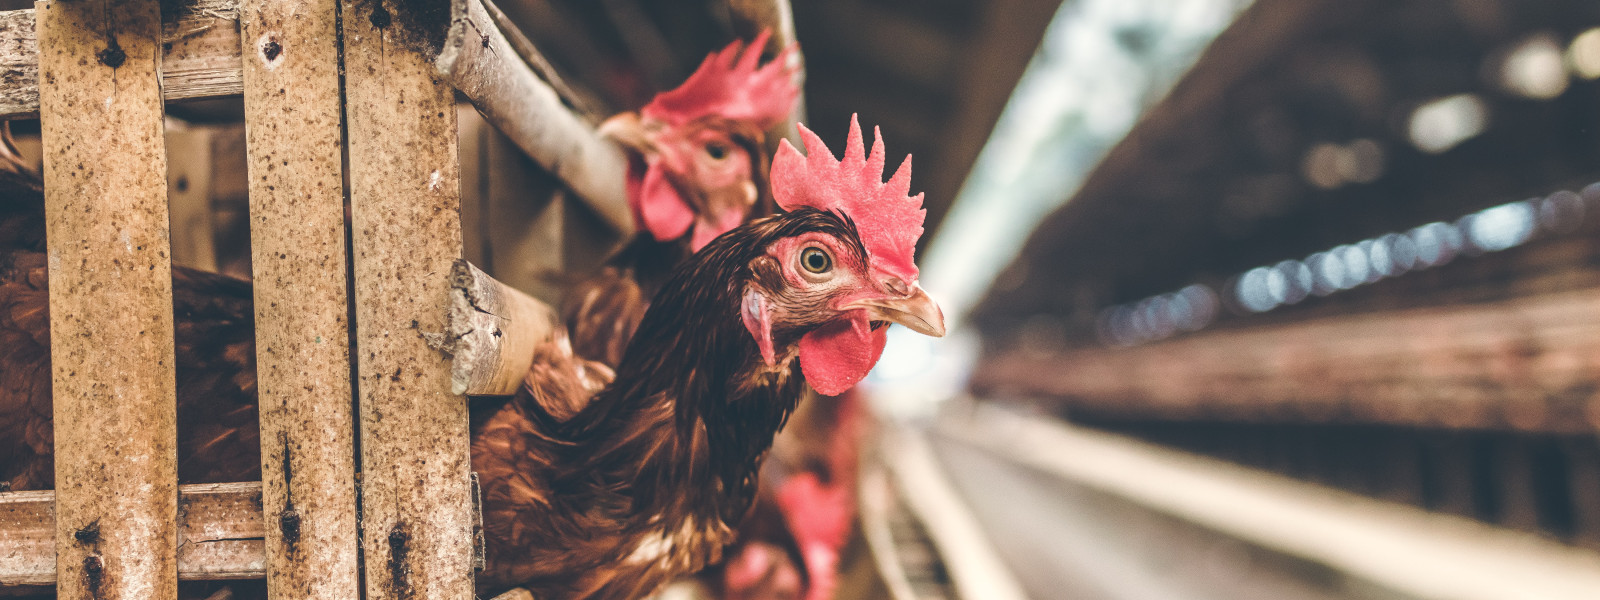 Avian Influenza Surveillance in Poultry: What to Expect